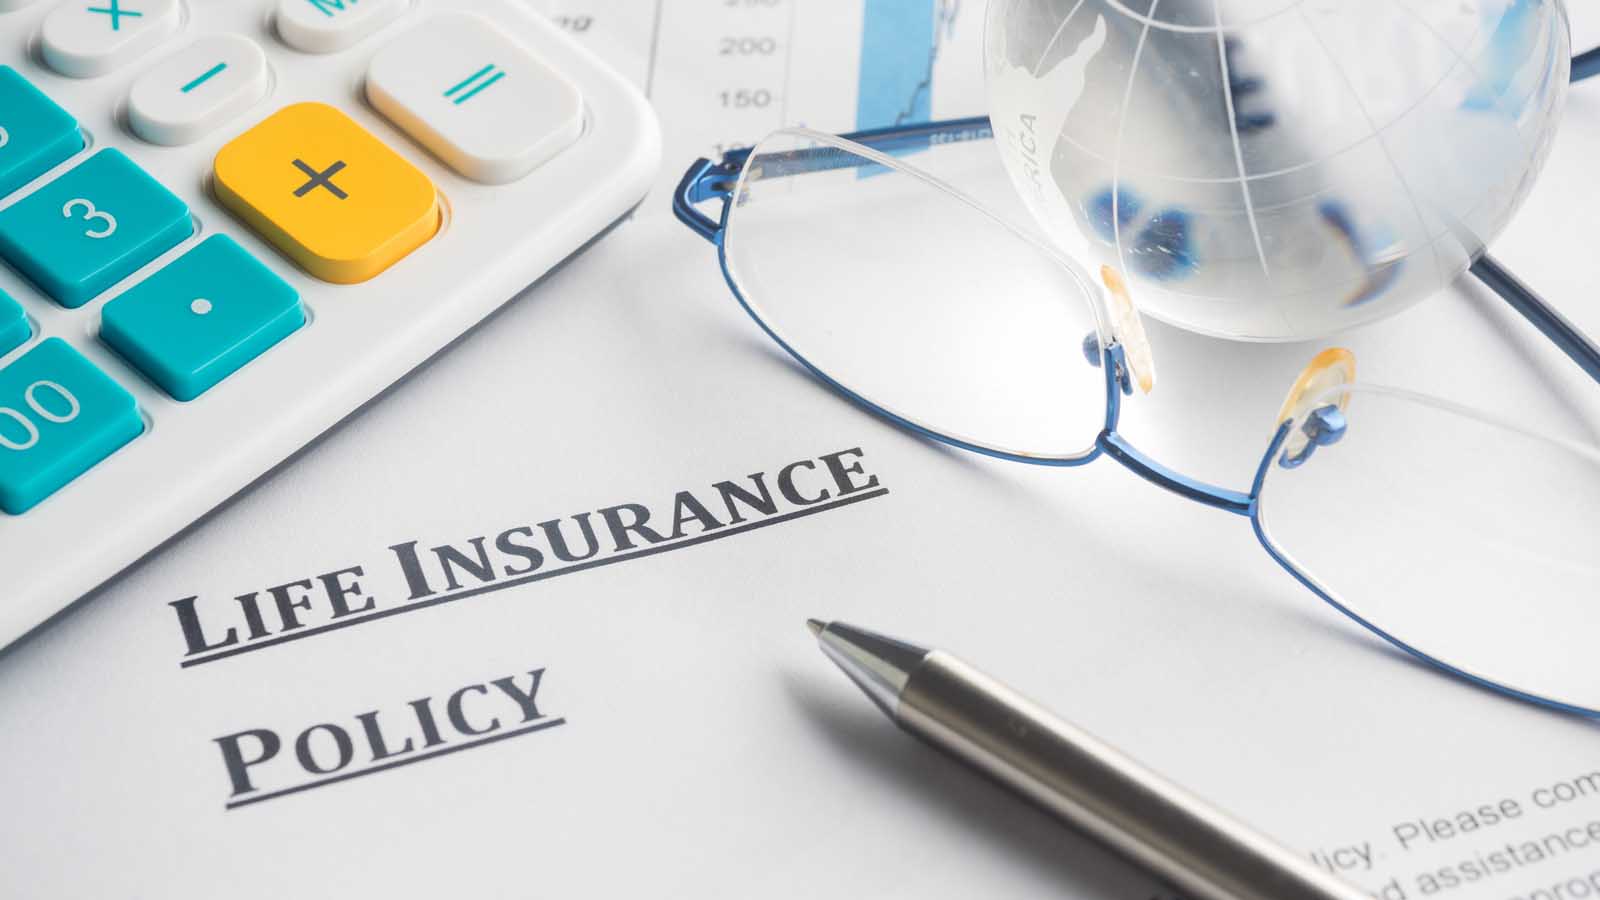 5 Insurance Stocks That Should Rise on Up in 2020 ...